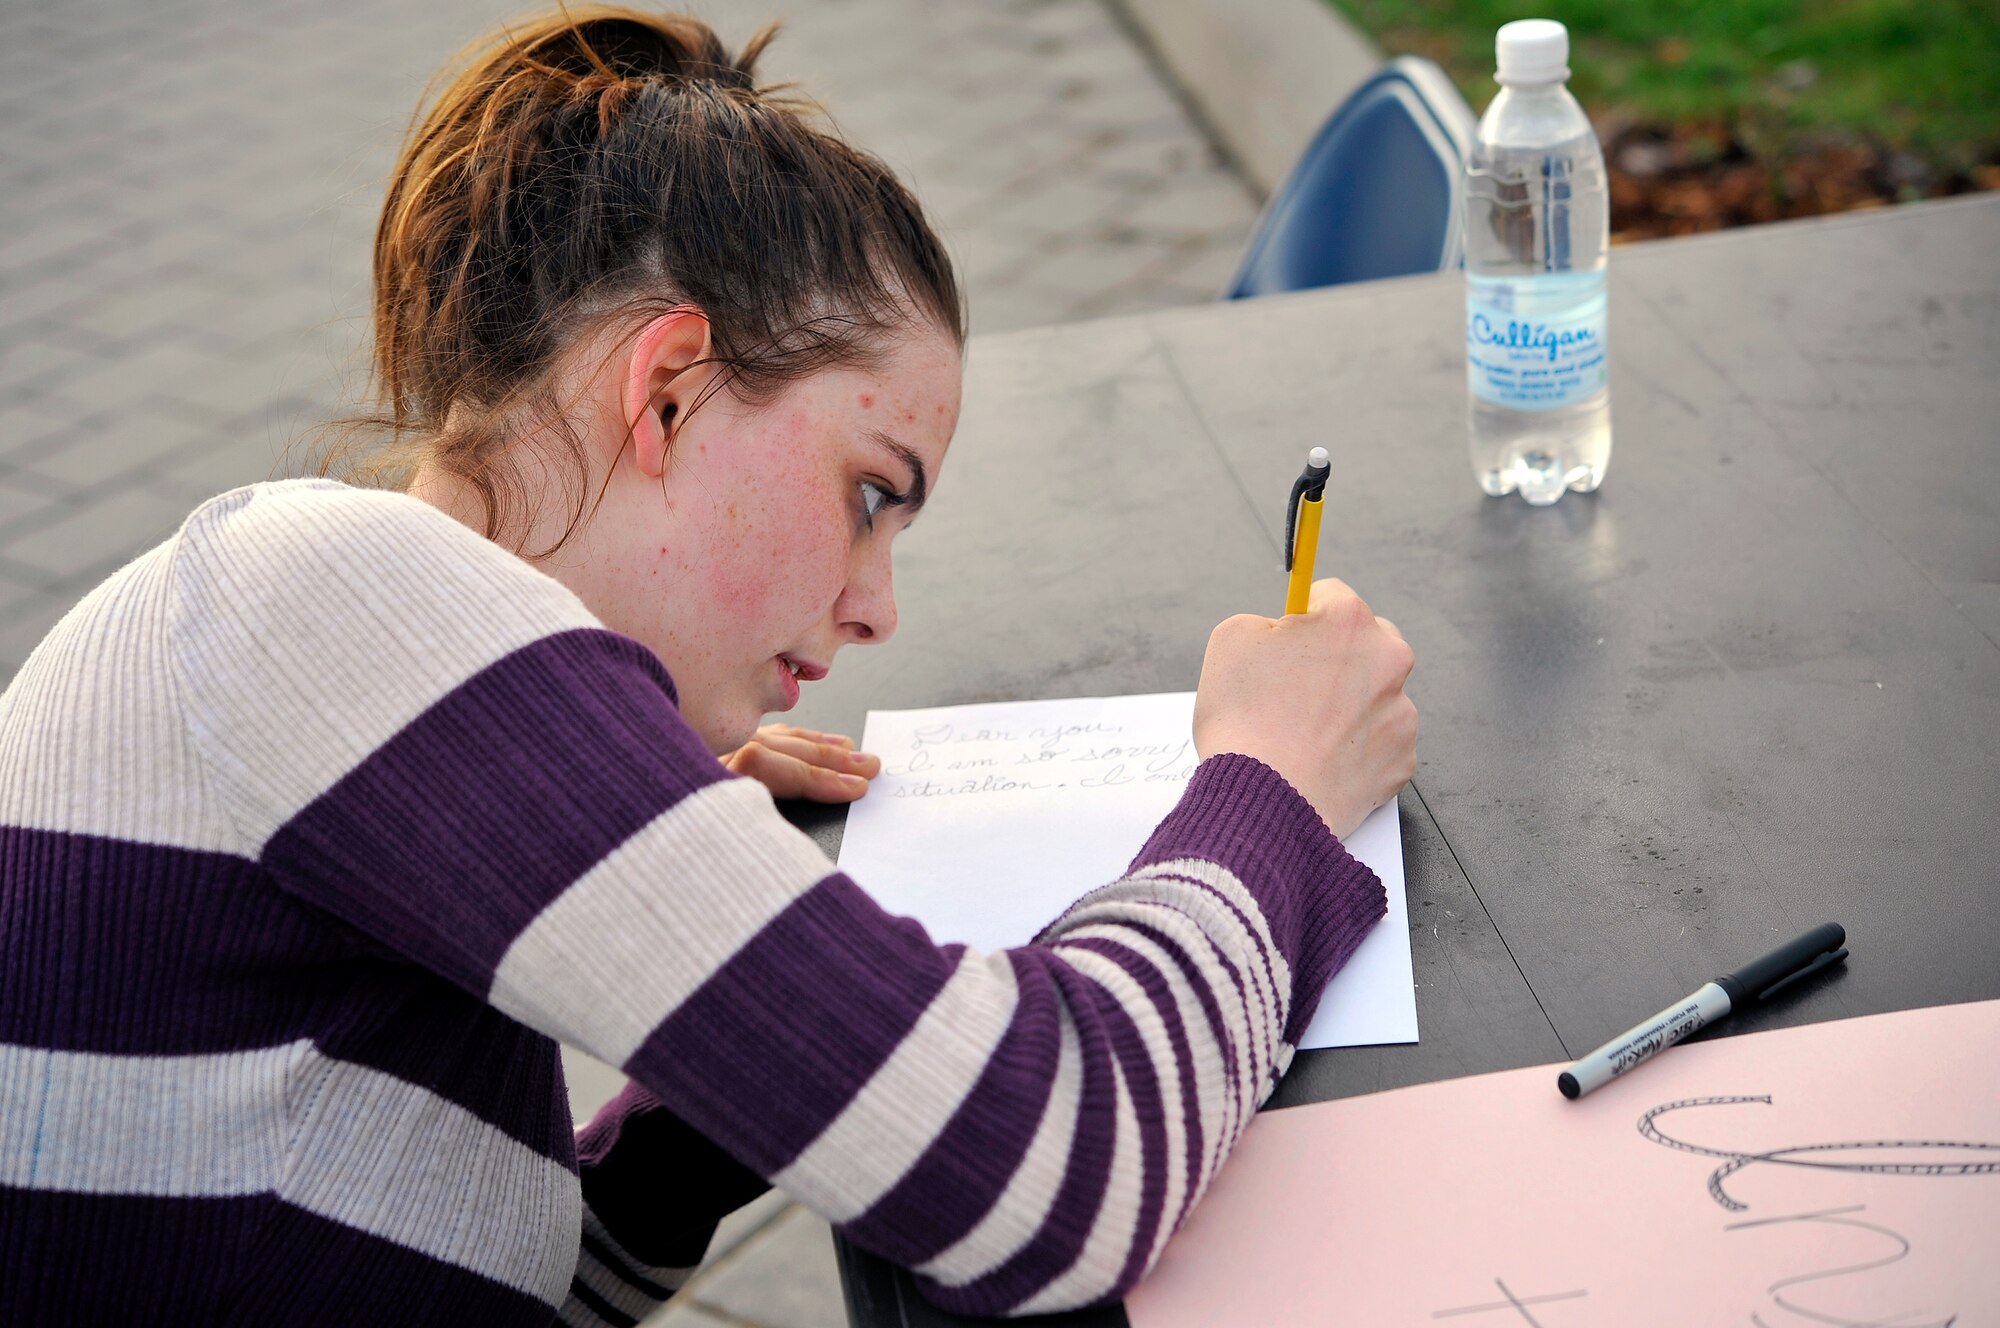 Kayla Kessel, Ramsetein High School senior, writes a letter of encouragement for members of a Covenant House in the U.S. during the Solidarity Sleep Out event April 19, 2013, Ramstein Air Base, Germany. The sleep out was organized by the Ramstein Keystone Club and was aimed at raising awareness for the homeless. (U.S. Air Force photo/Airman 1st Class Trevor Rhynes)